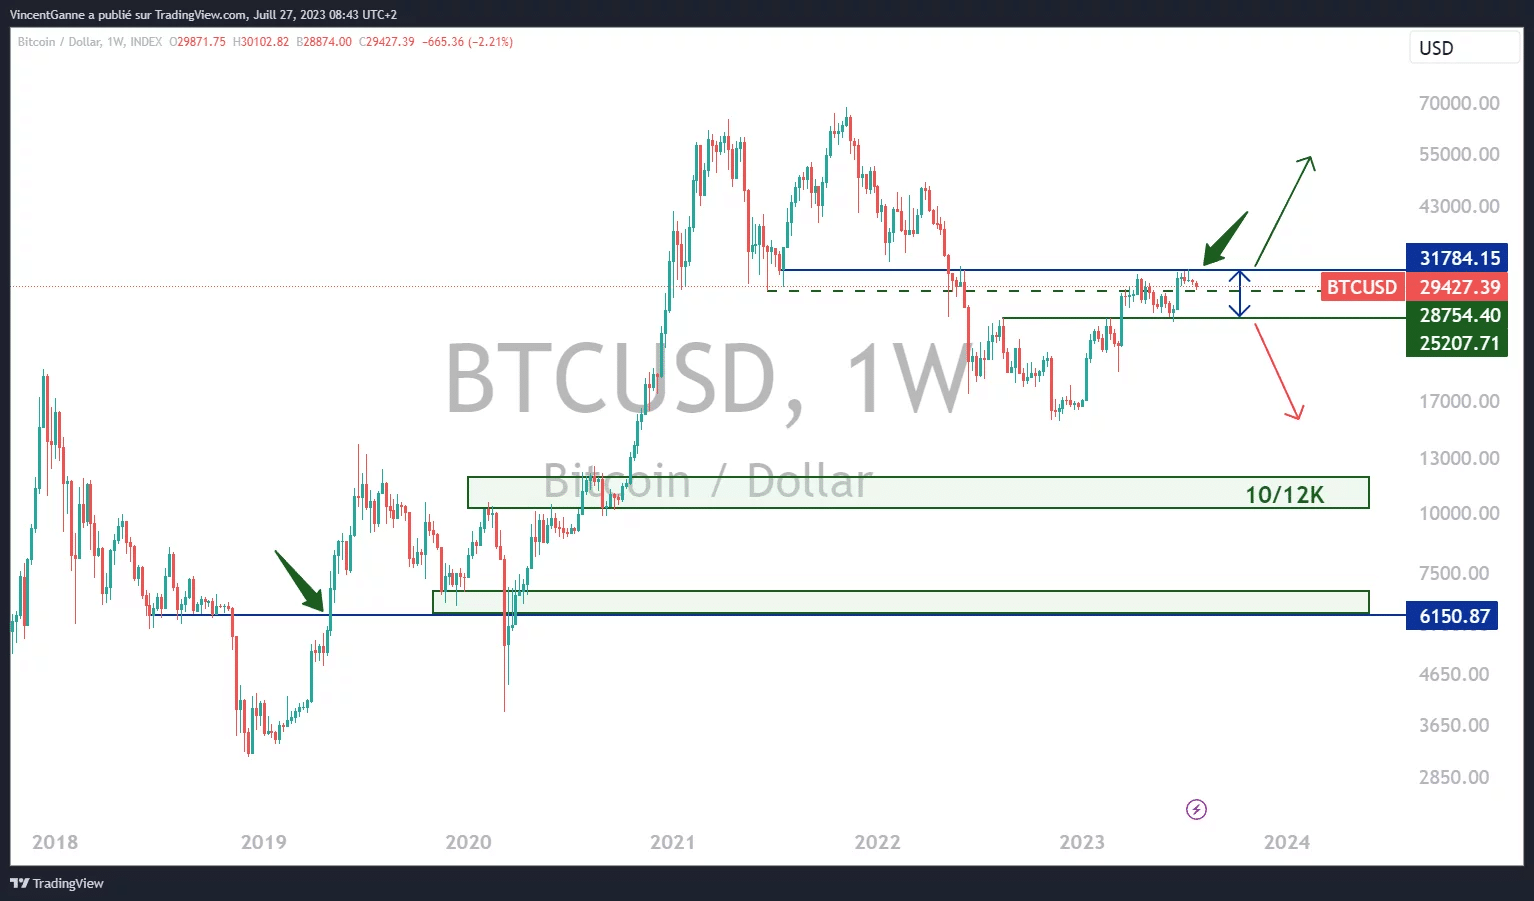 Chart created with the TradingView website, displaying weekly candlestick bitcoin prices